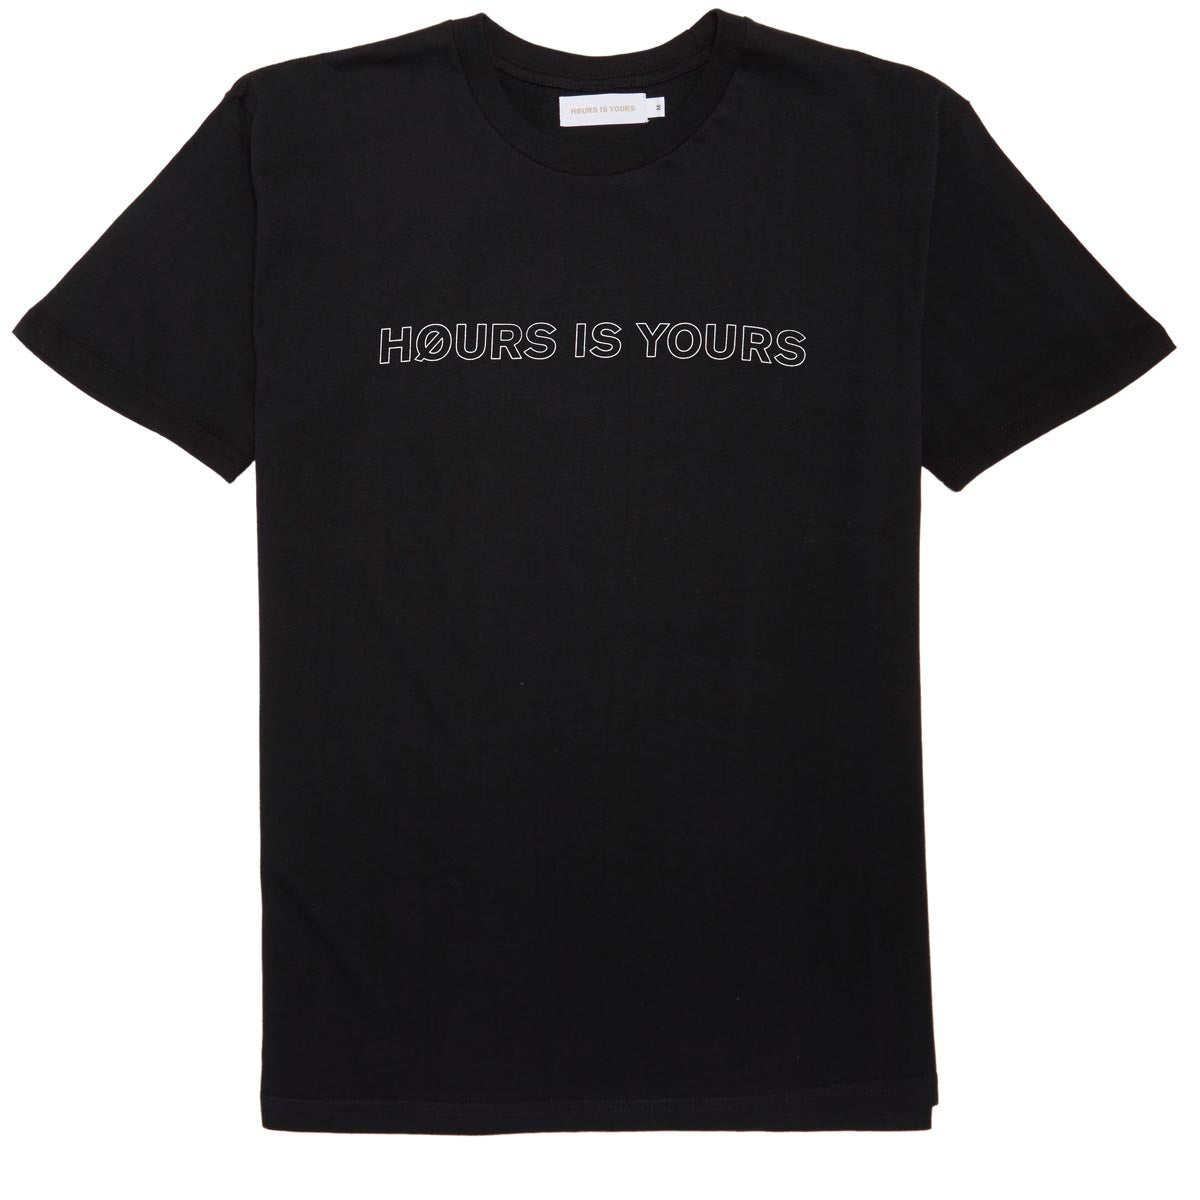 Hours Is Yours Outline T-Shirt - Black image 1